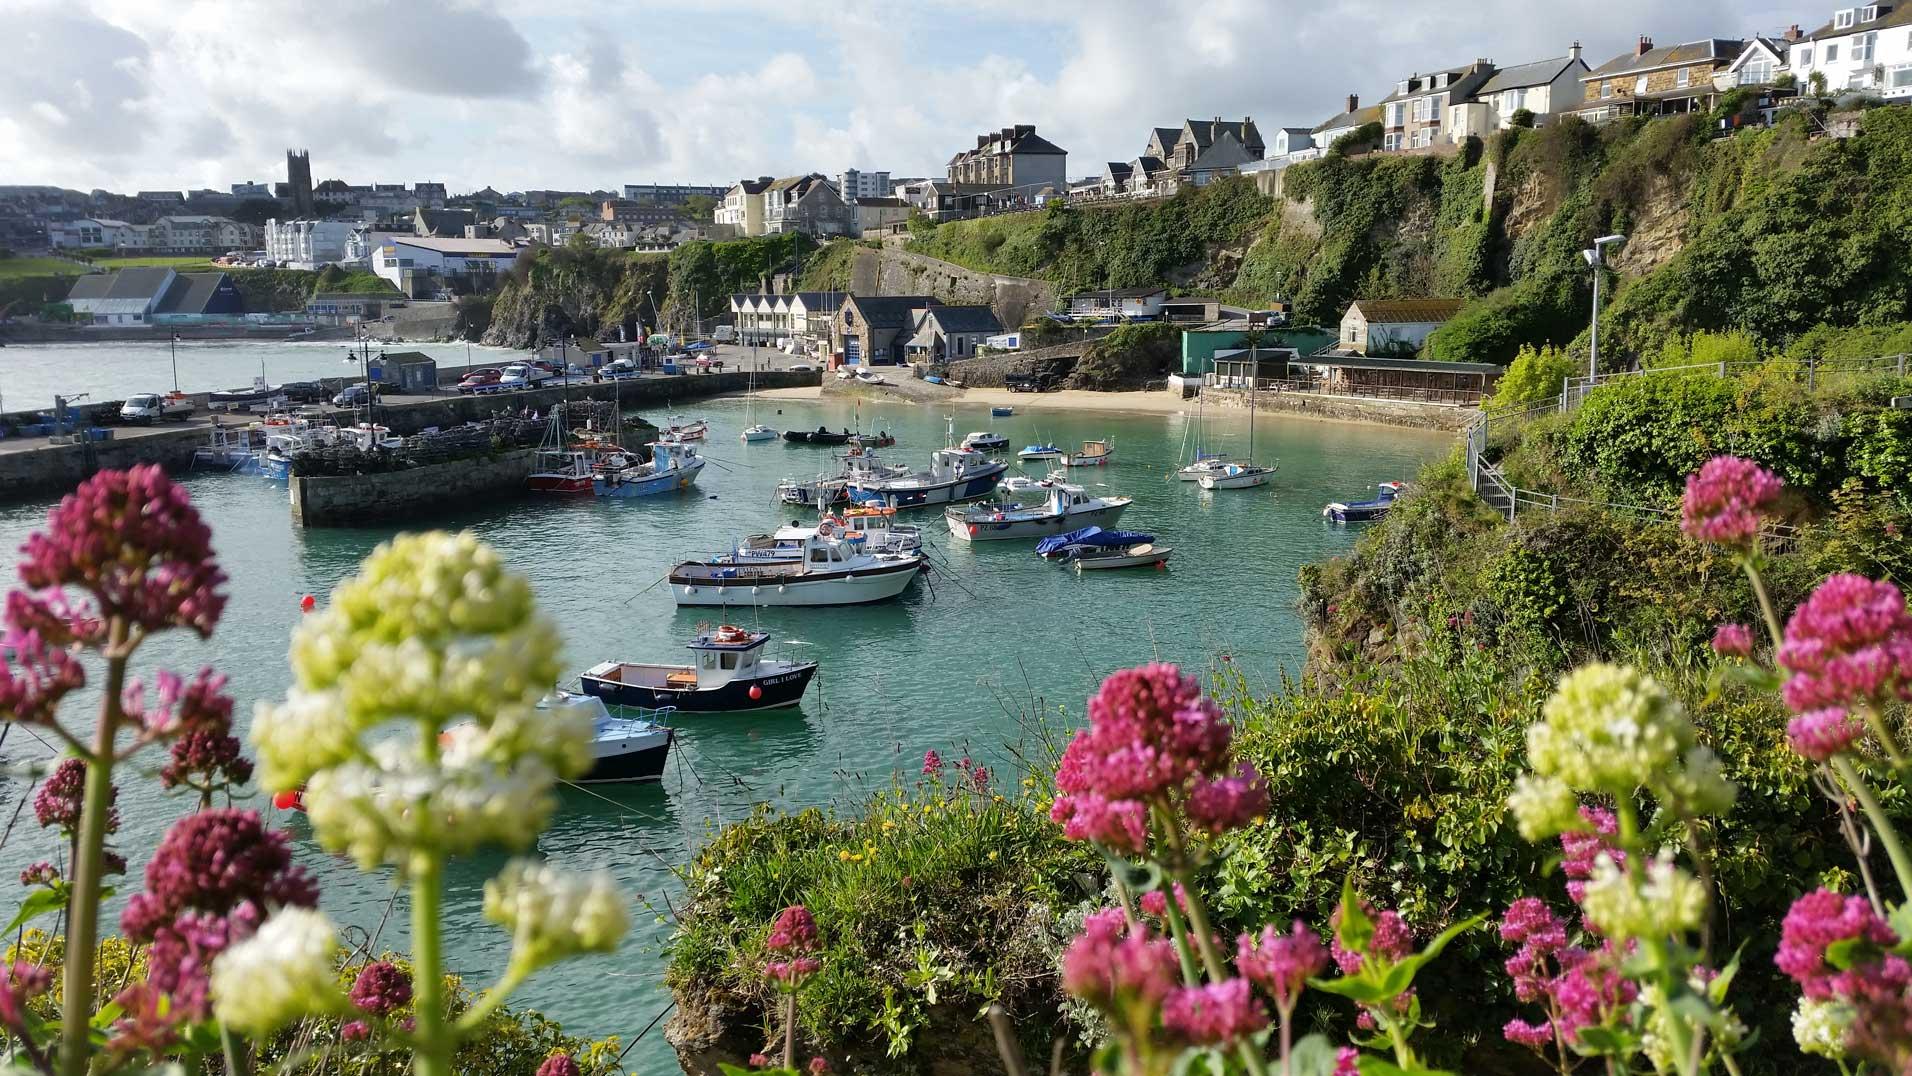 Newquay harbour through flowers.